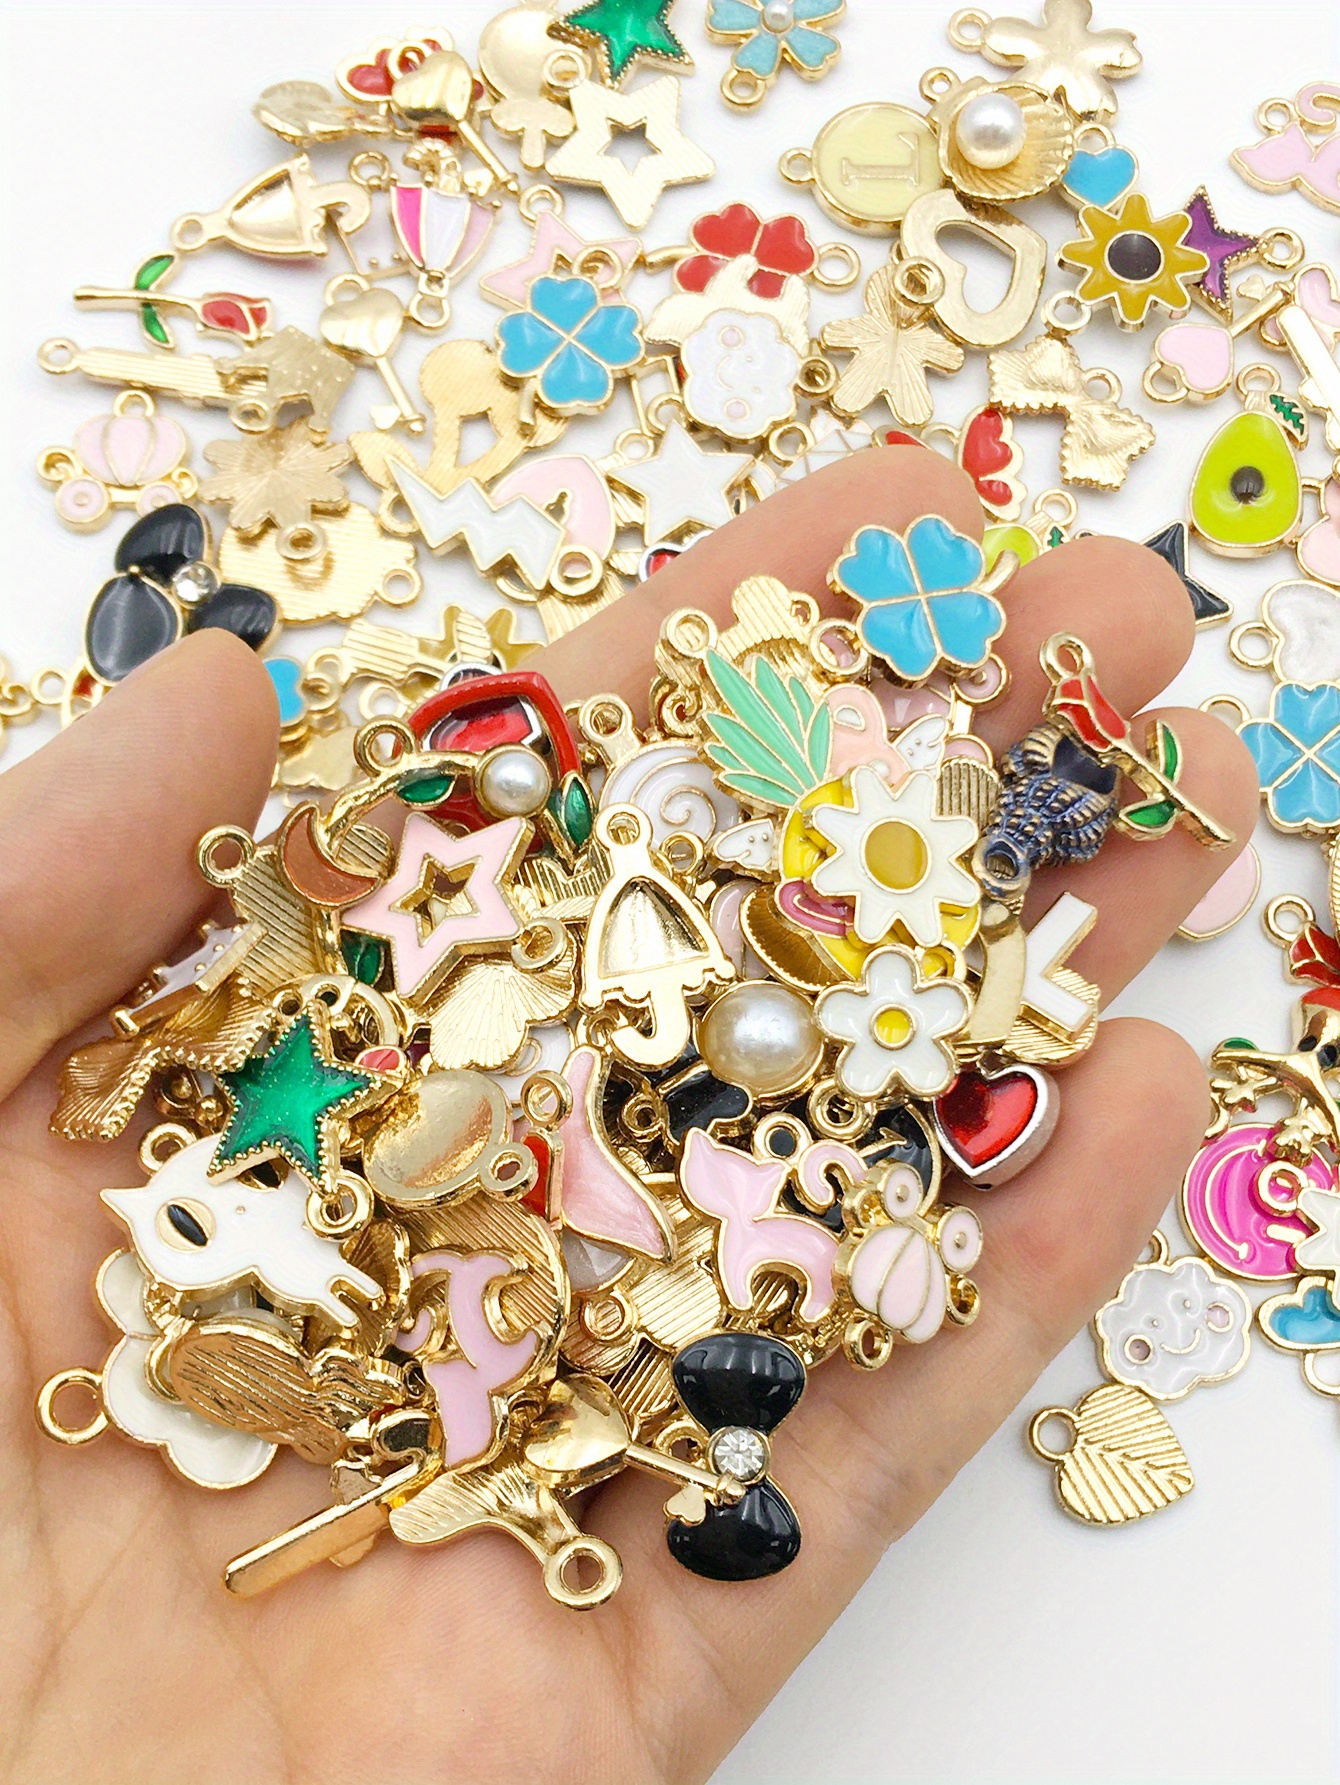  WEWAYSMILE 40 Pcs Gold Charms for Jewelry Making Gold Plated  Enamel Pendants 40 Styles Cute Charms for Bcracelet Earring Necklace  Keychain DIY Jewelry Making Craft Supplies : Arts, Crafts & Sewing